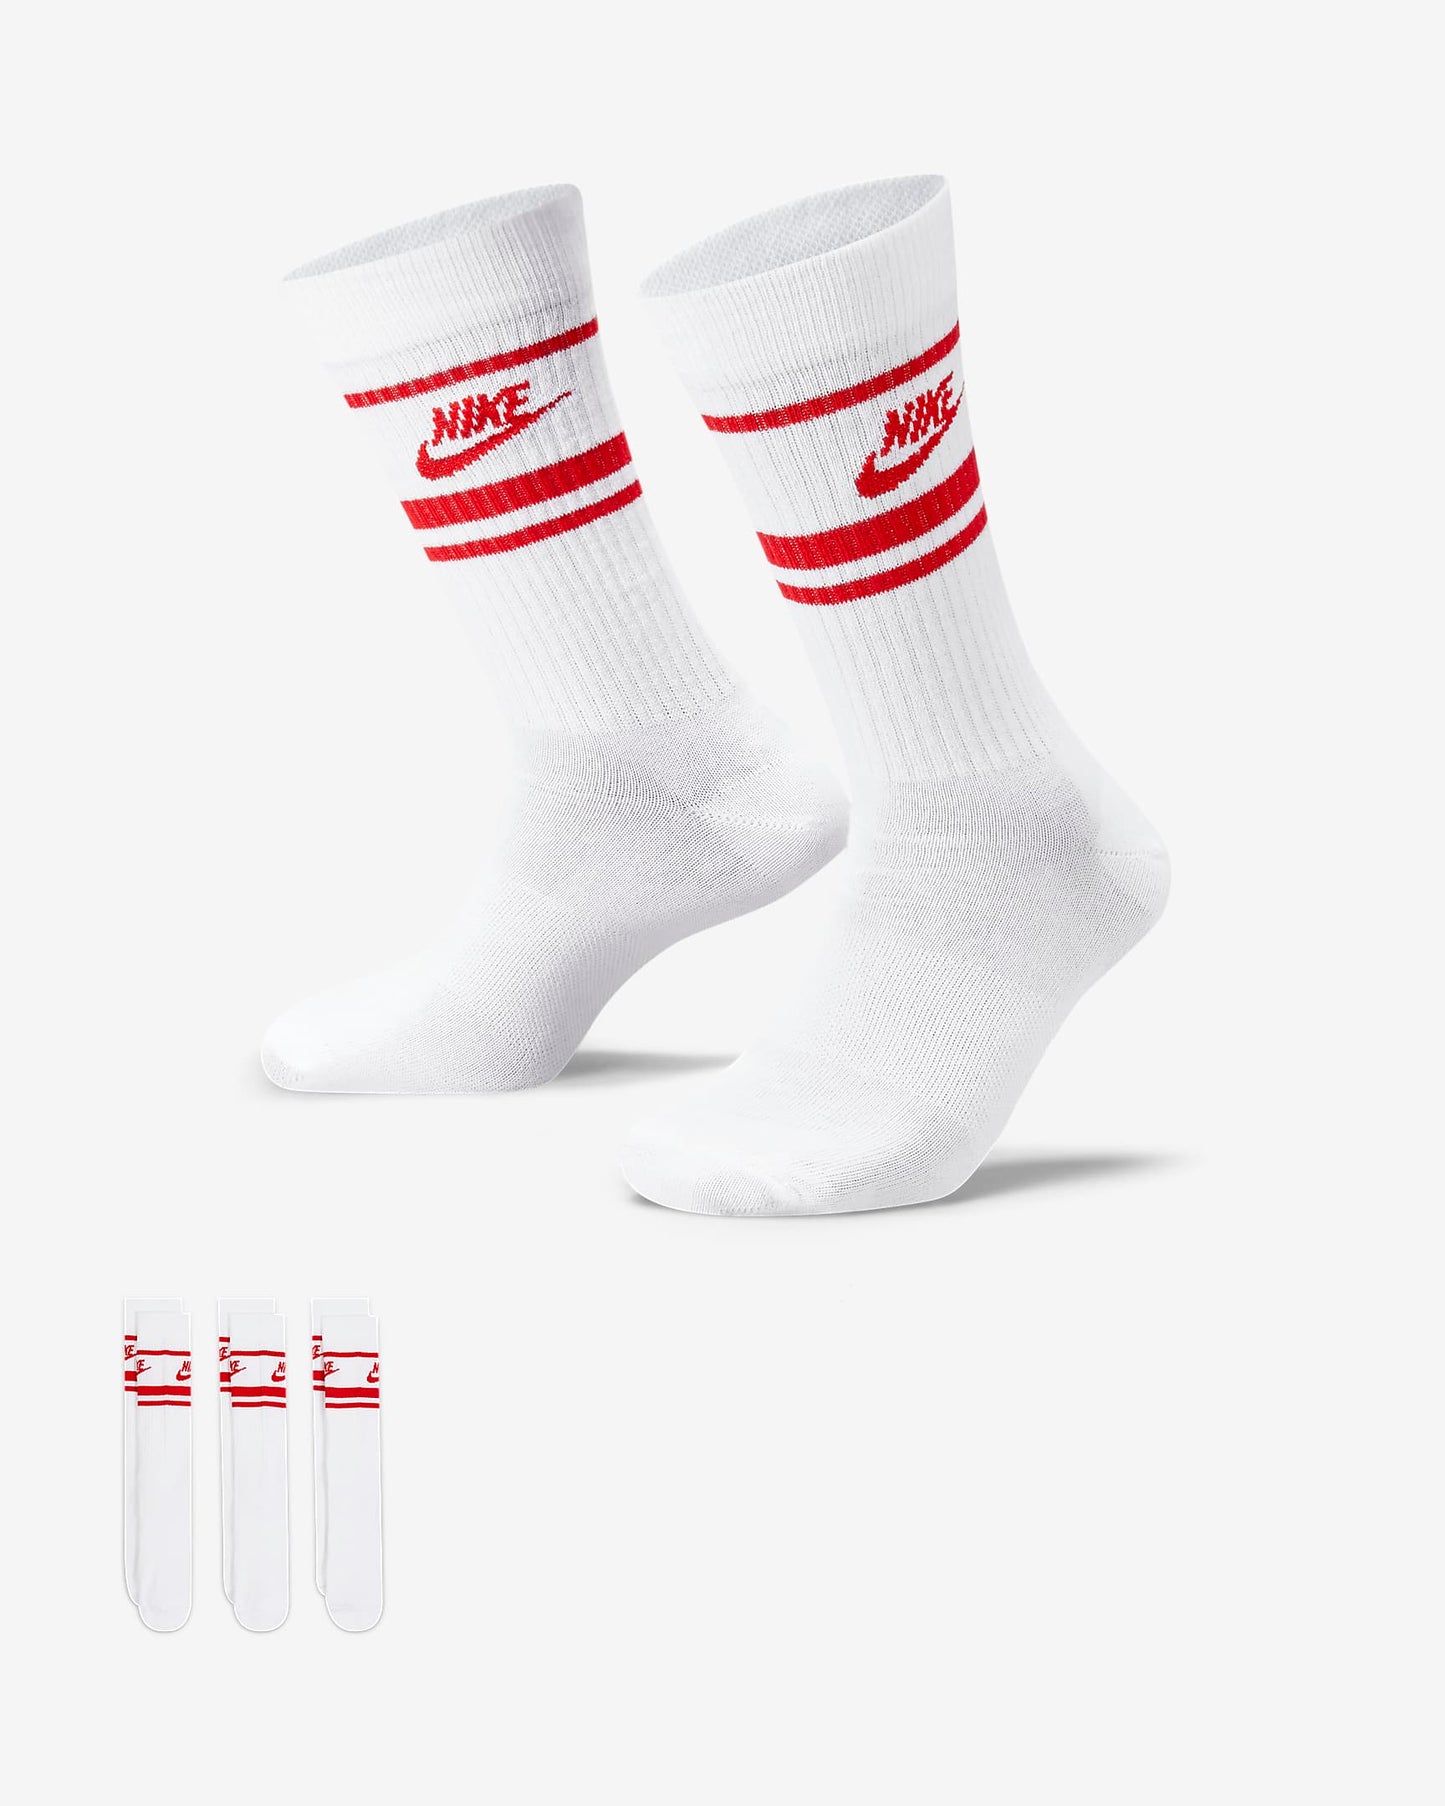 Nike Sportswear Everyday Essential Crew Socks ( 3 Pack) - White and red